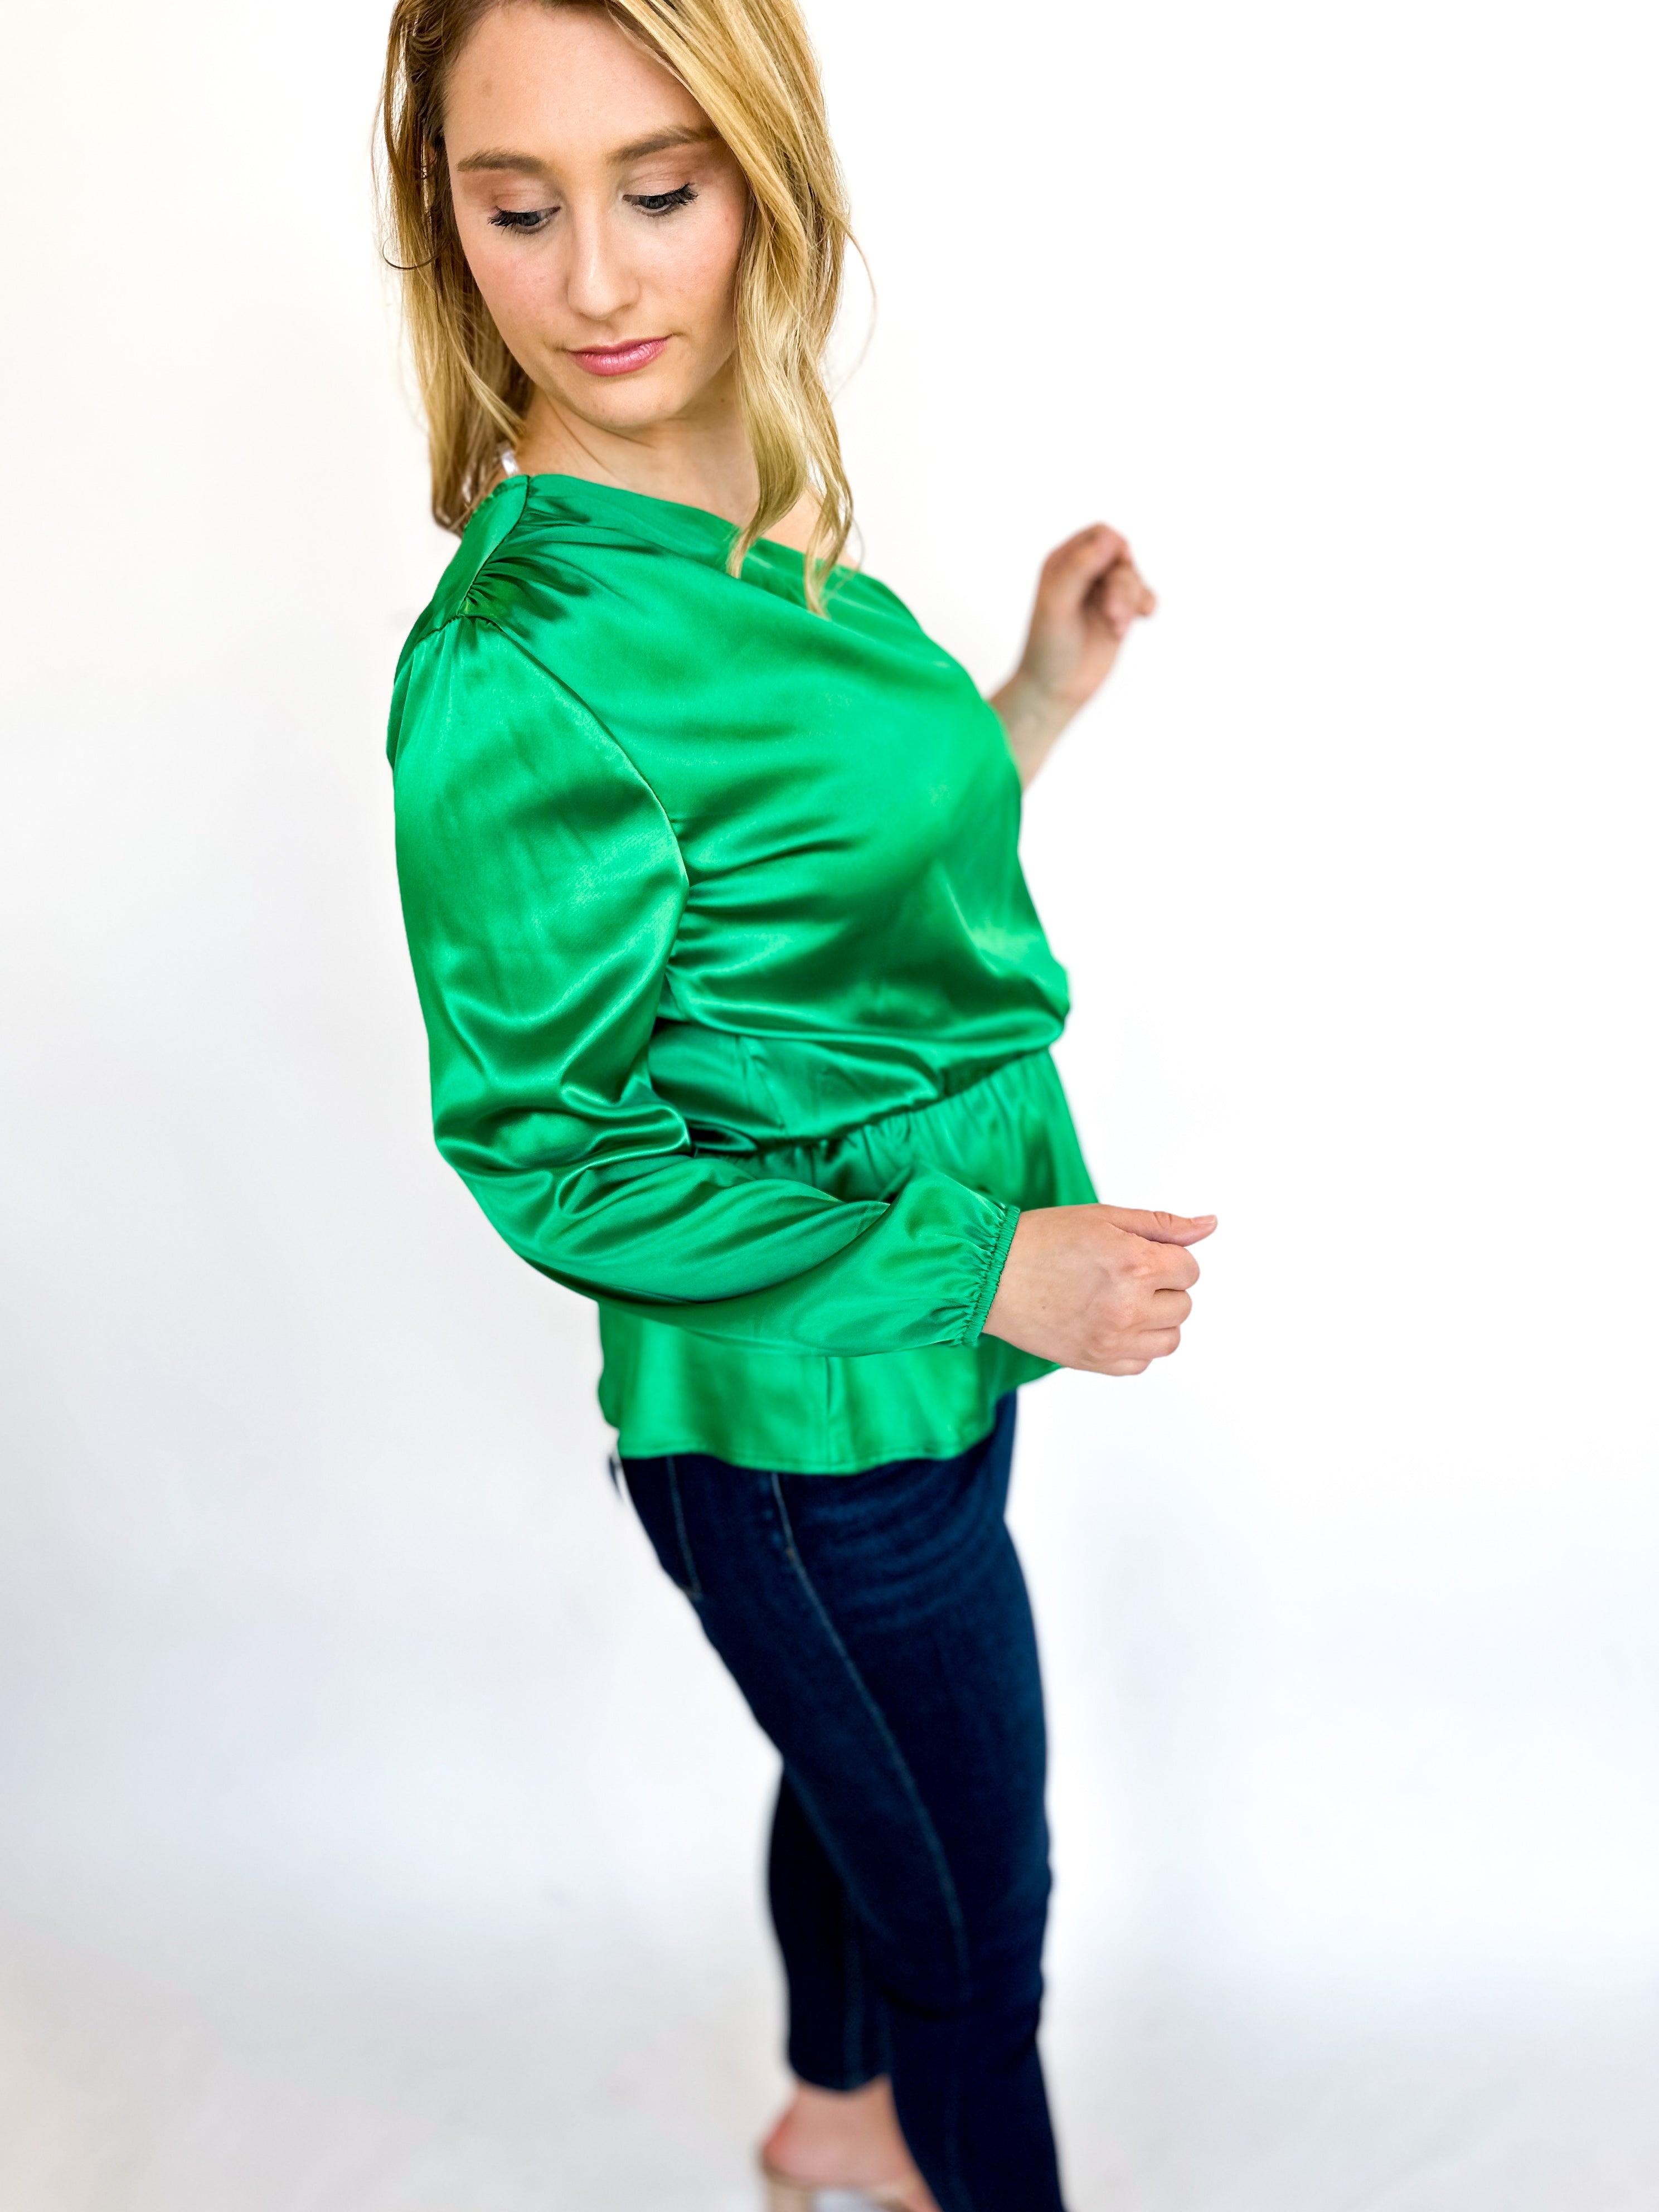 One Shoulder Party Blouse - Mistletoe Green-200 Fashion Blouses-ADRIENNE-July & June Women's Fashion Boutique Located in San Antonio, Texas